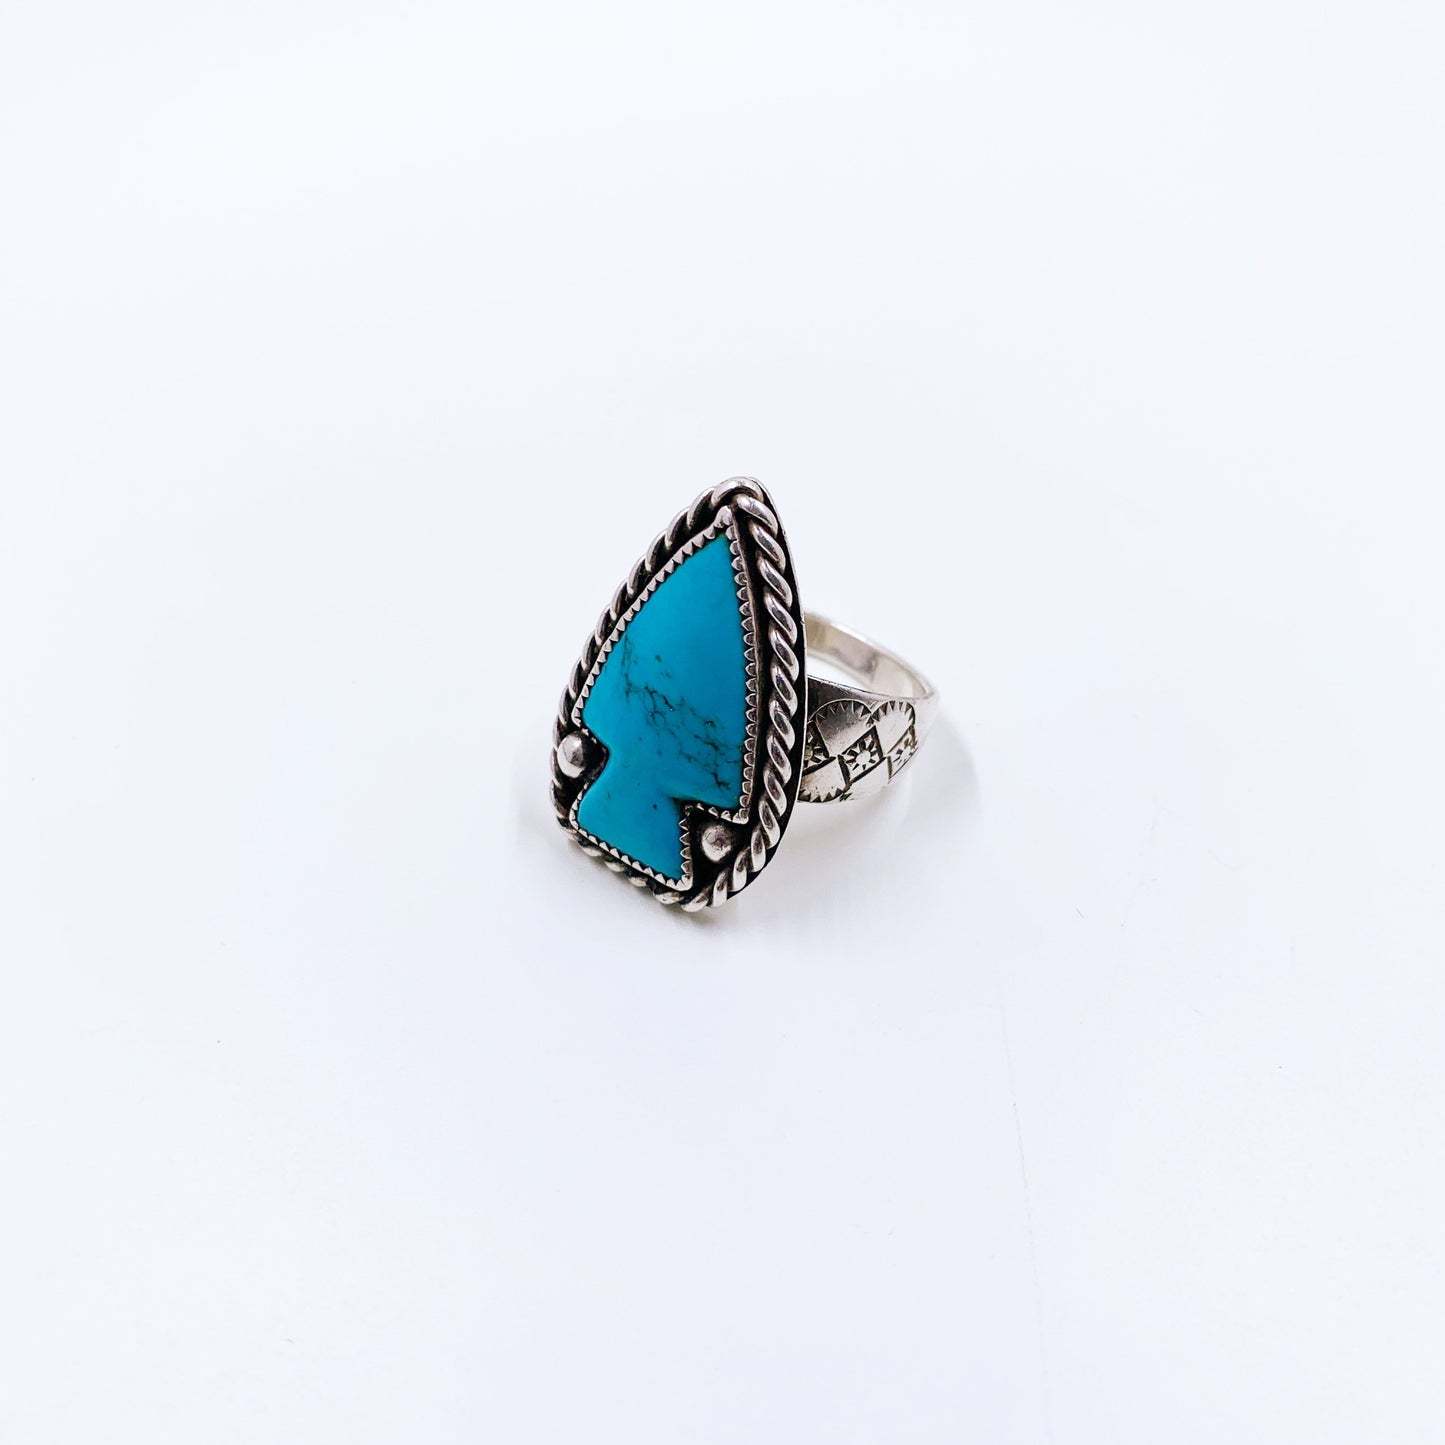 Vintage Turquoise Arrowhead Ring | Size 11 1/2 Ring